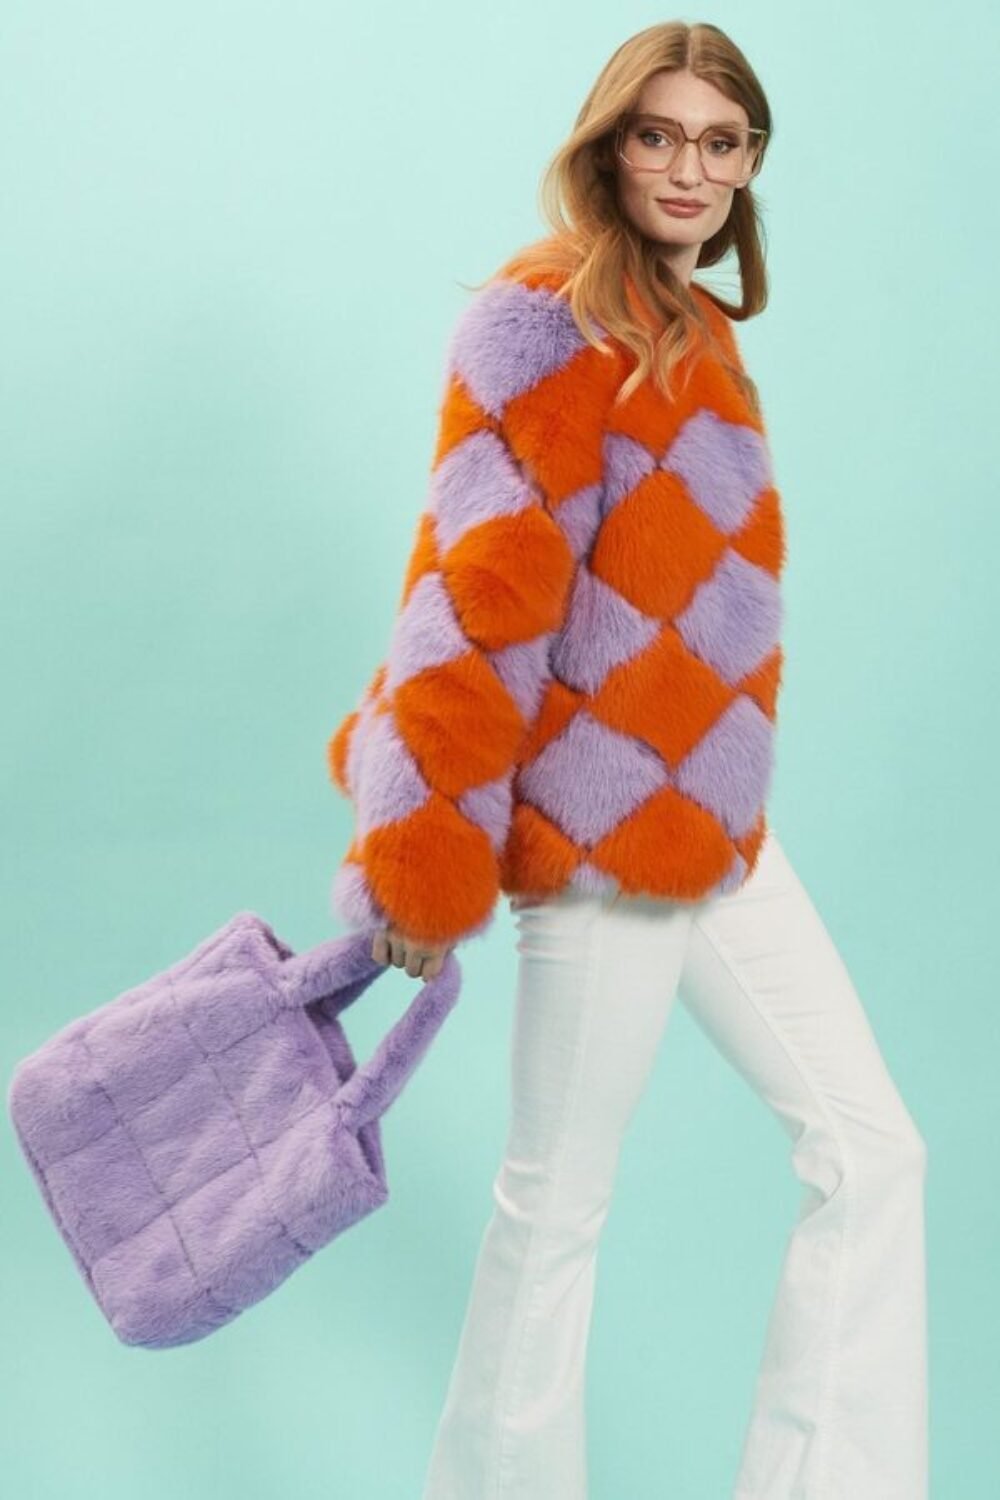 Shop Lux Orange and Purple Delilah Diamond Faux Fur Jacket and women's luxury and designer clothes at www.lux-apparel.co.uk